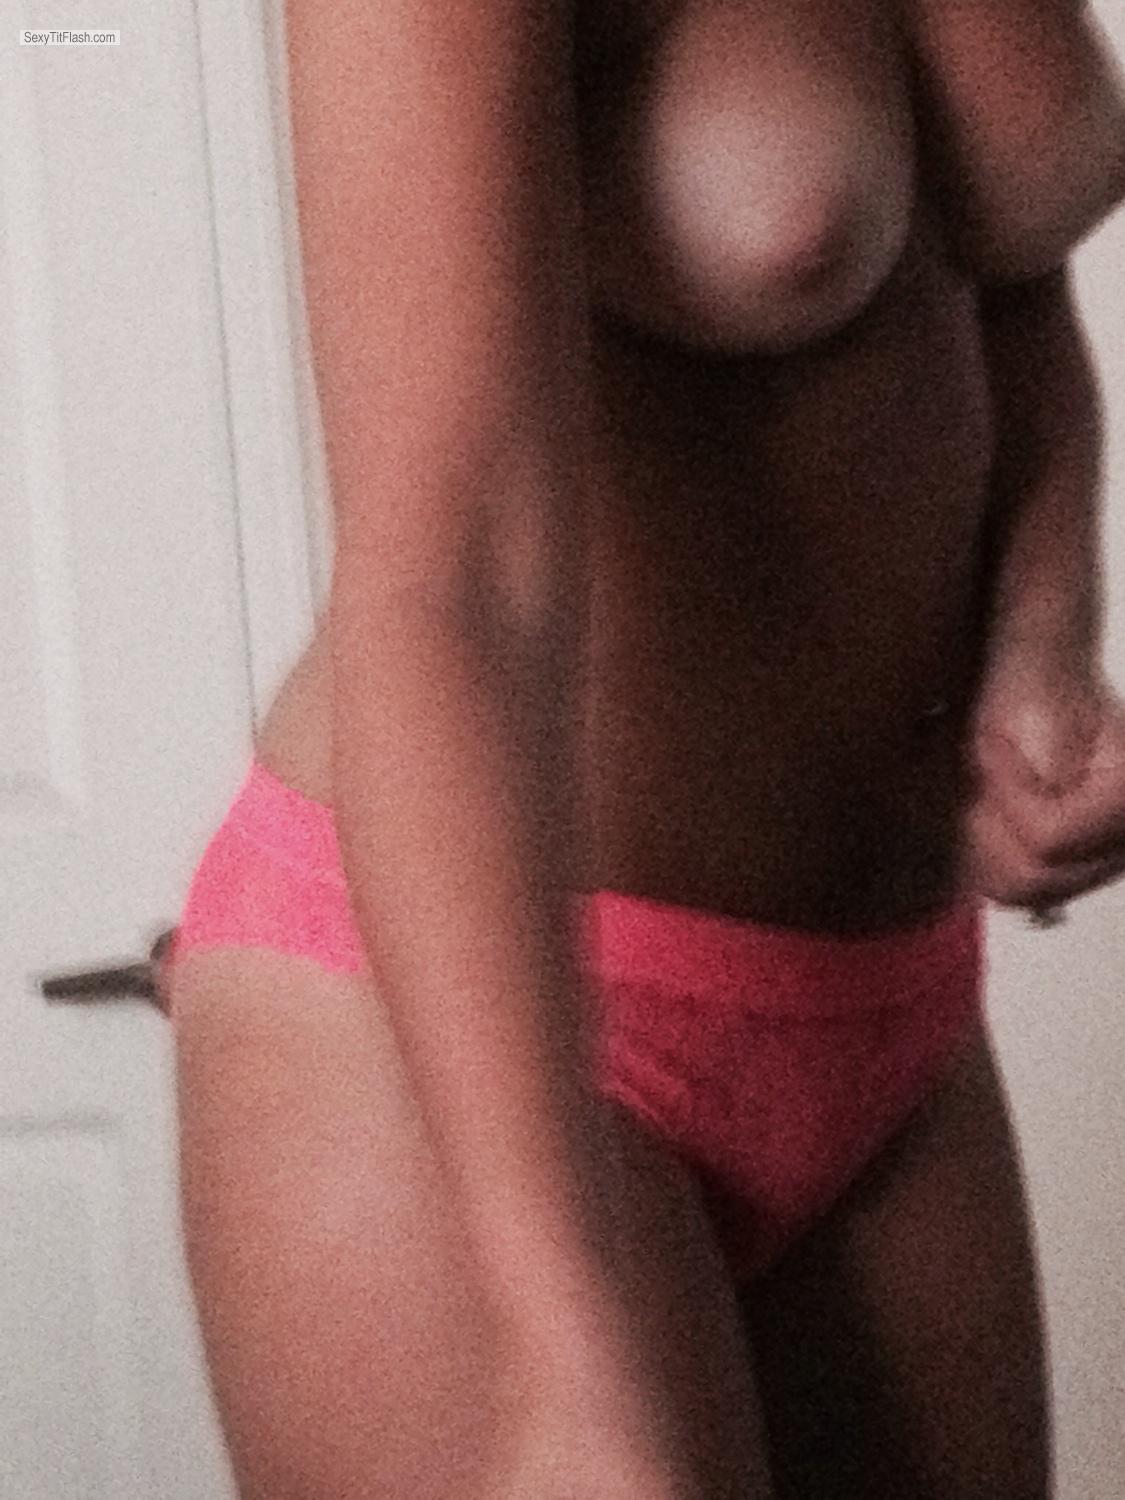 Tit Flash: Medium Tits By IPhone - Morning from United States